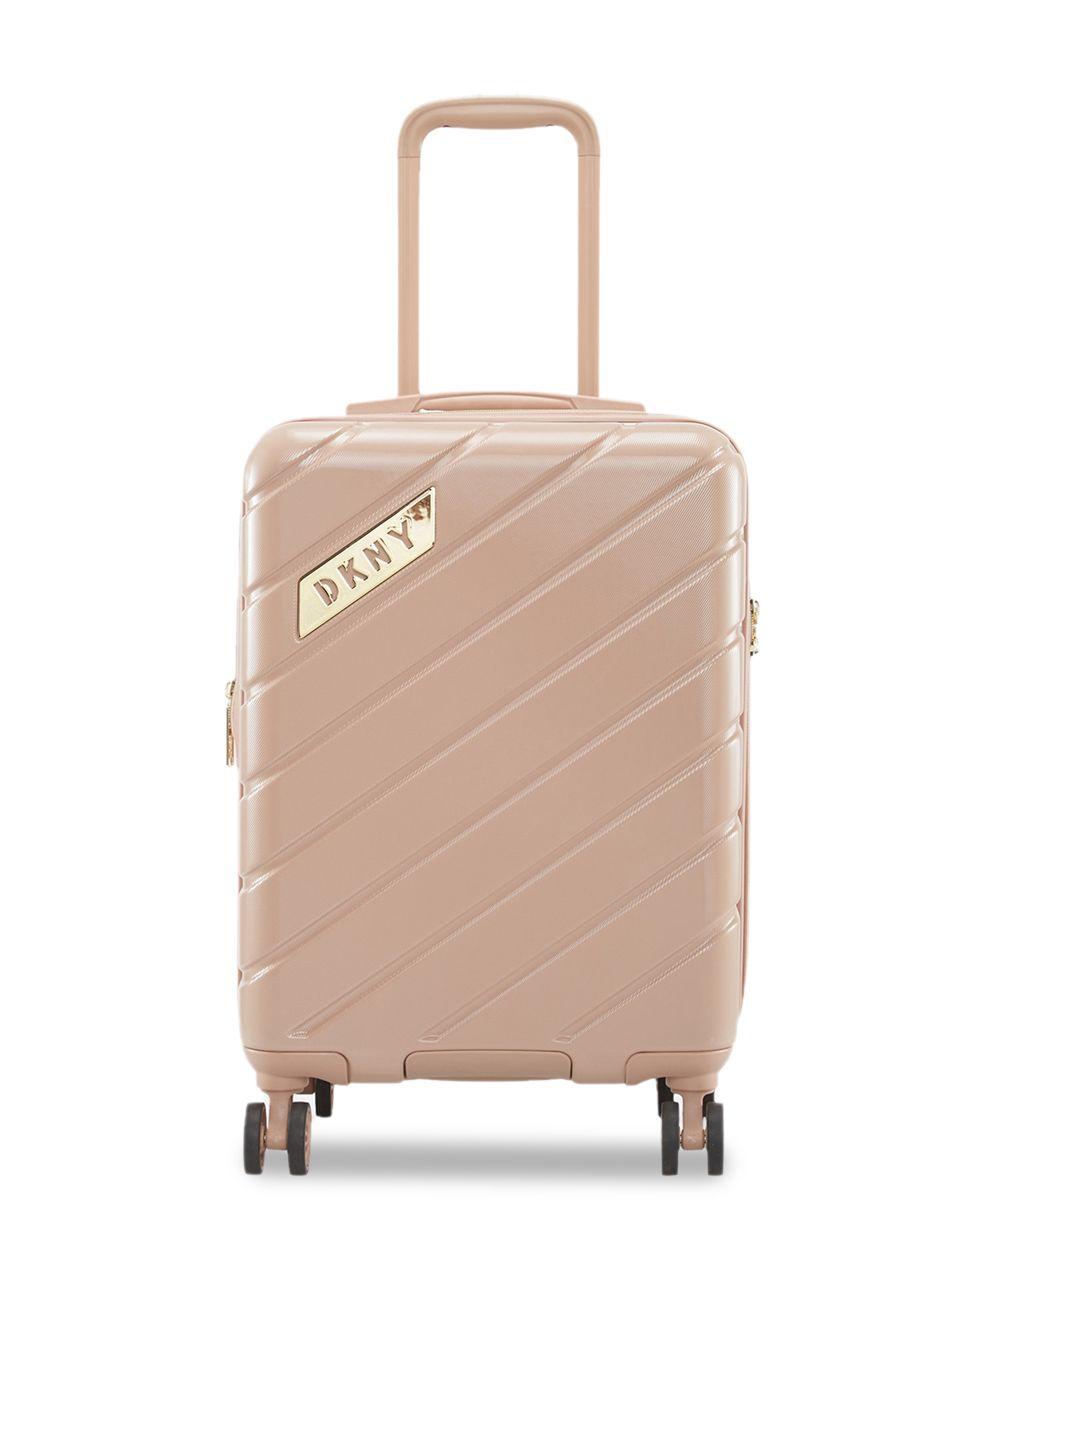 dkny bias textured hard-sided cabin trolley suitcase